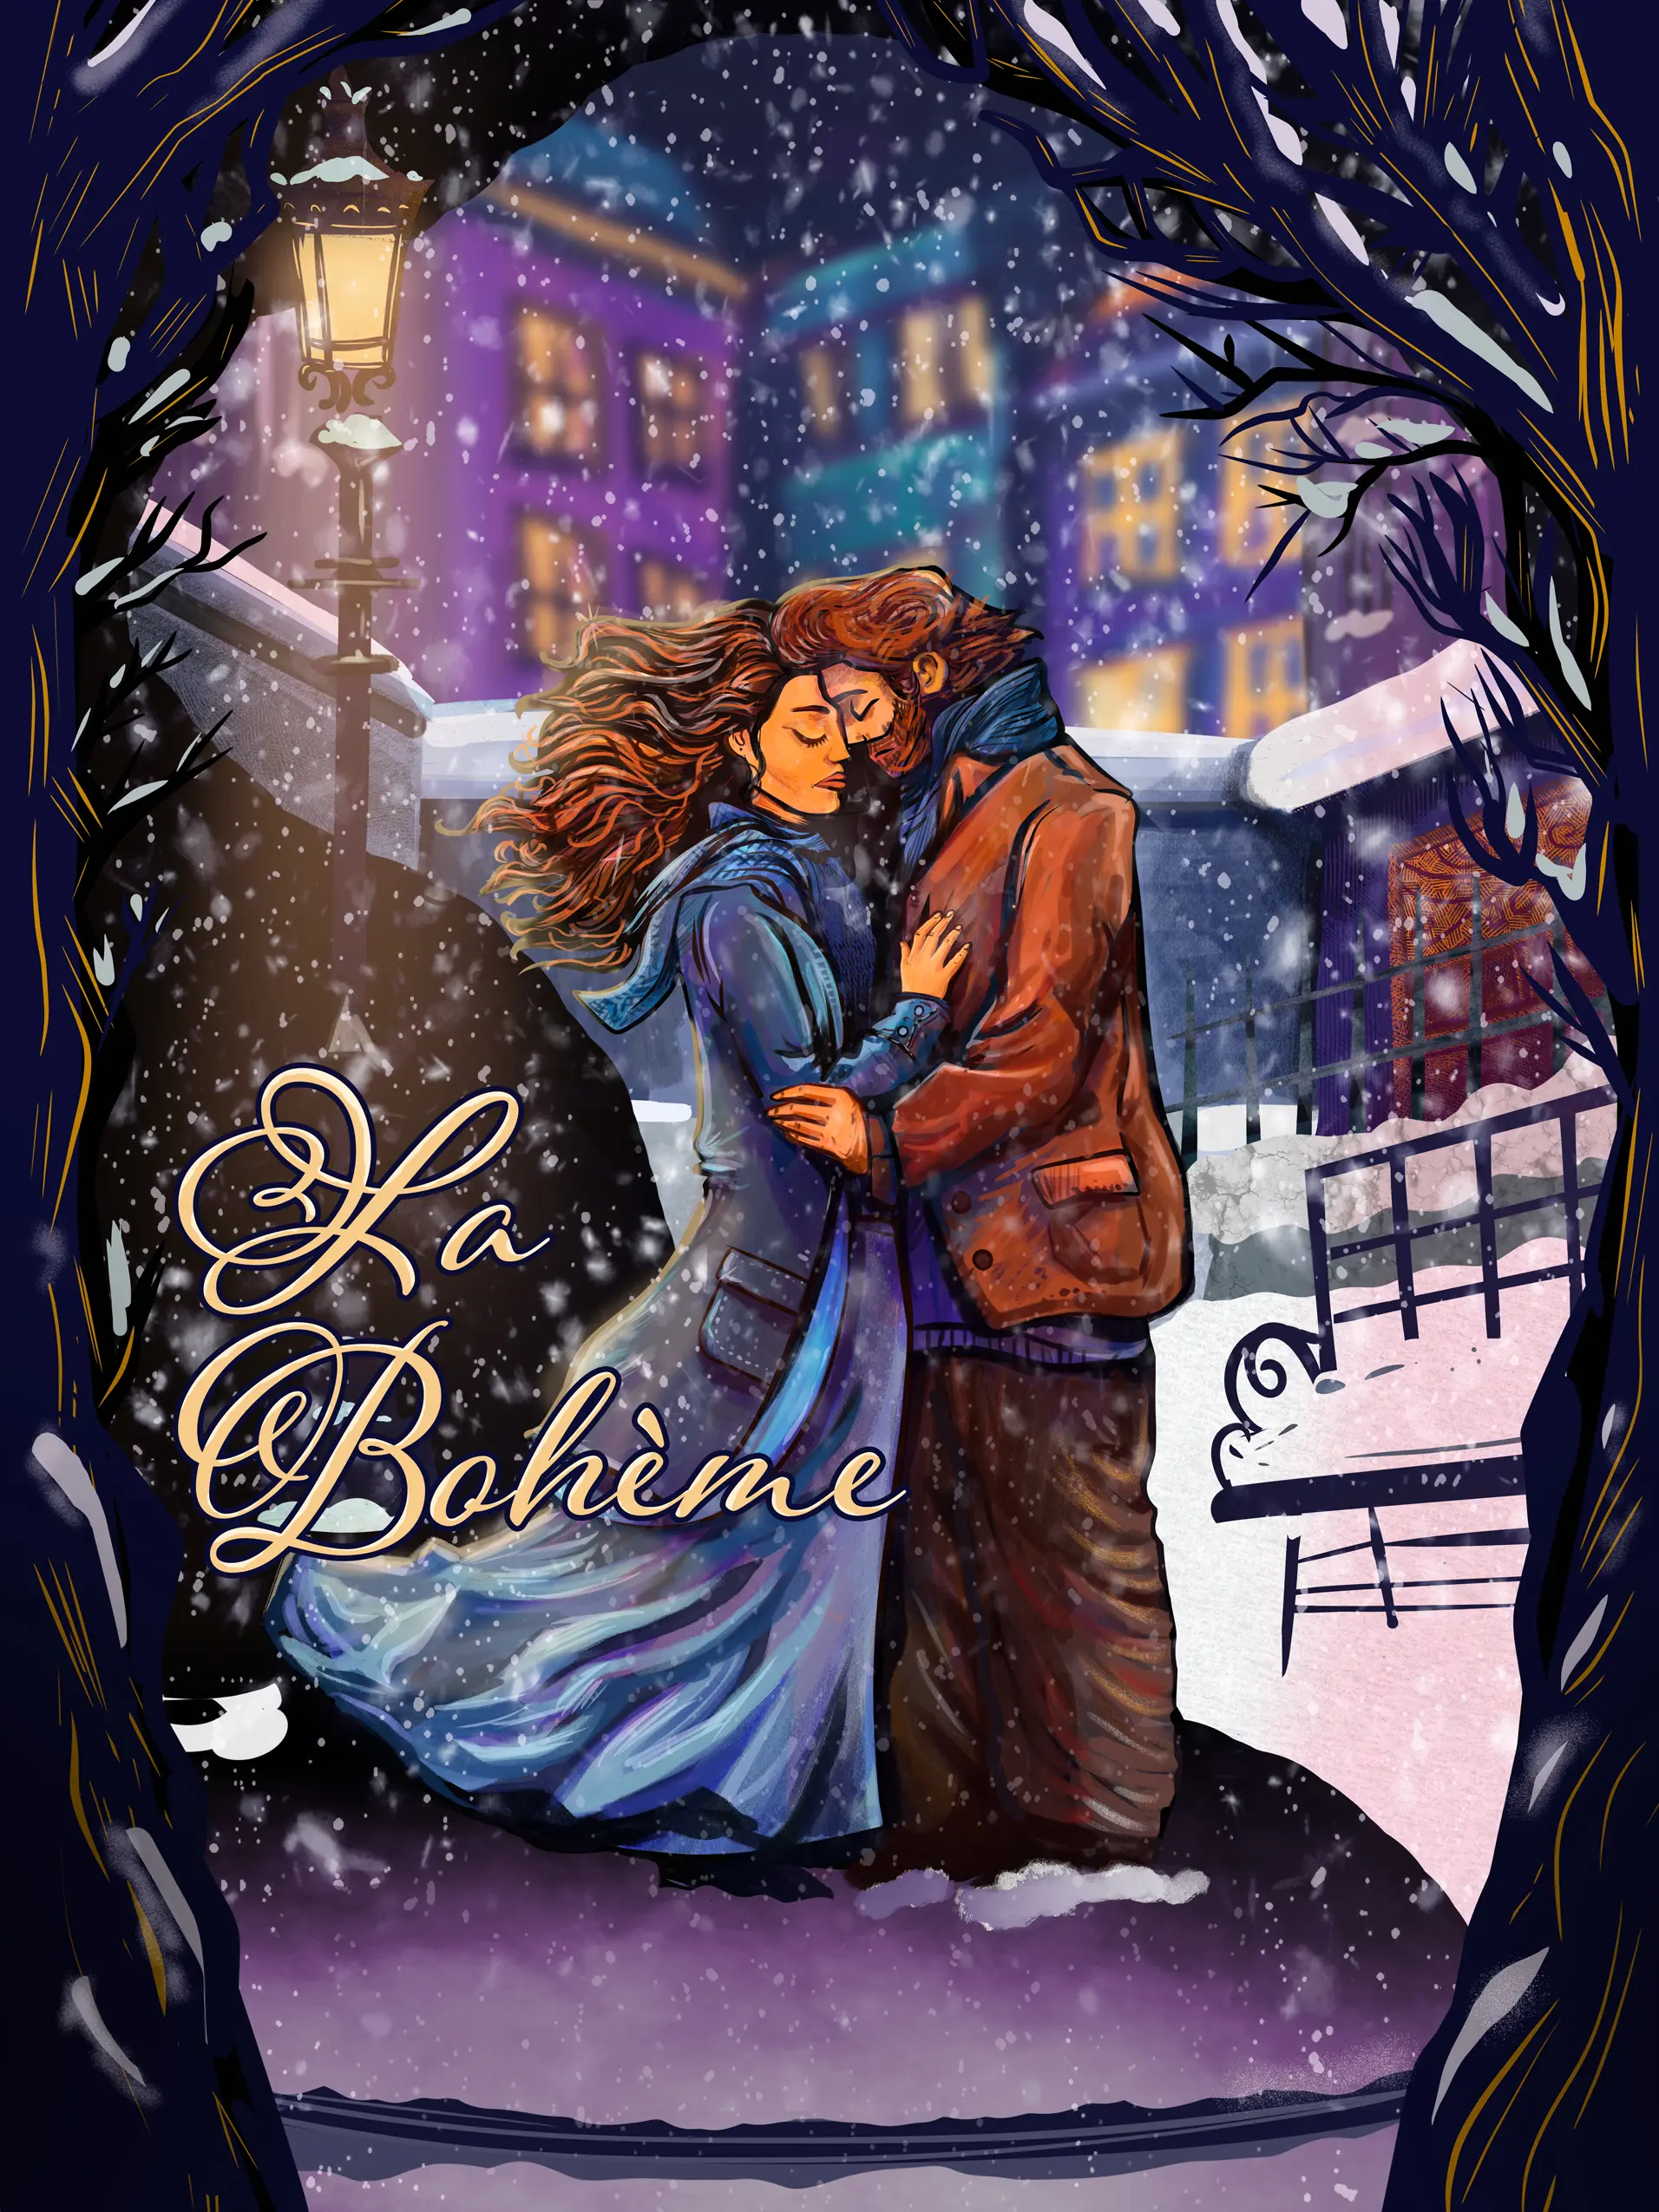 Opera Las Vegas's poster for Puccini's La Boheme. An artistic representation of Rodolfo and Mimi in the snow scene, as a trail of blackness representing her disease comes to take her away.